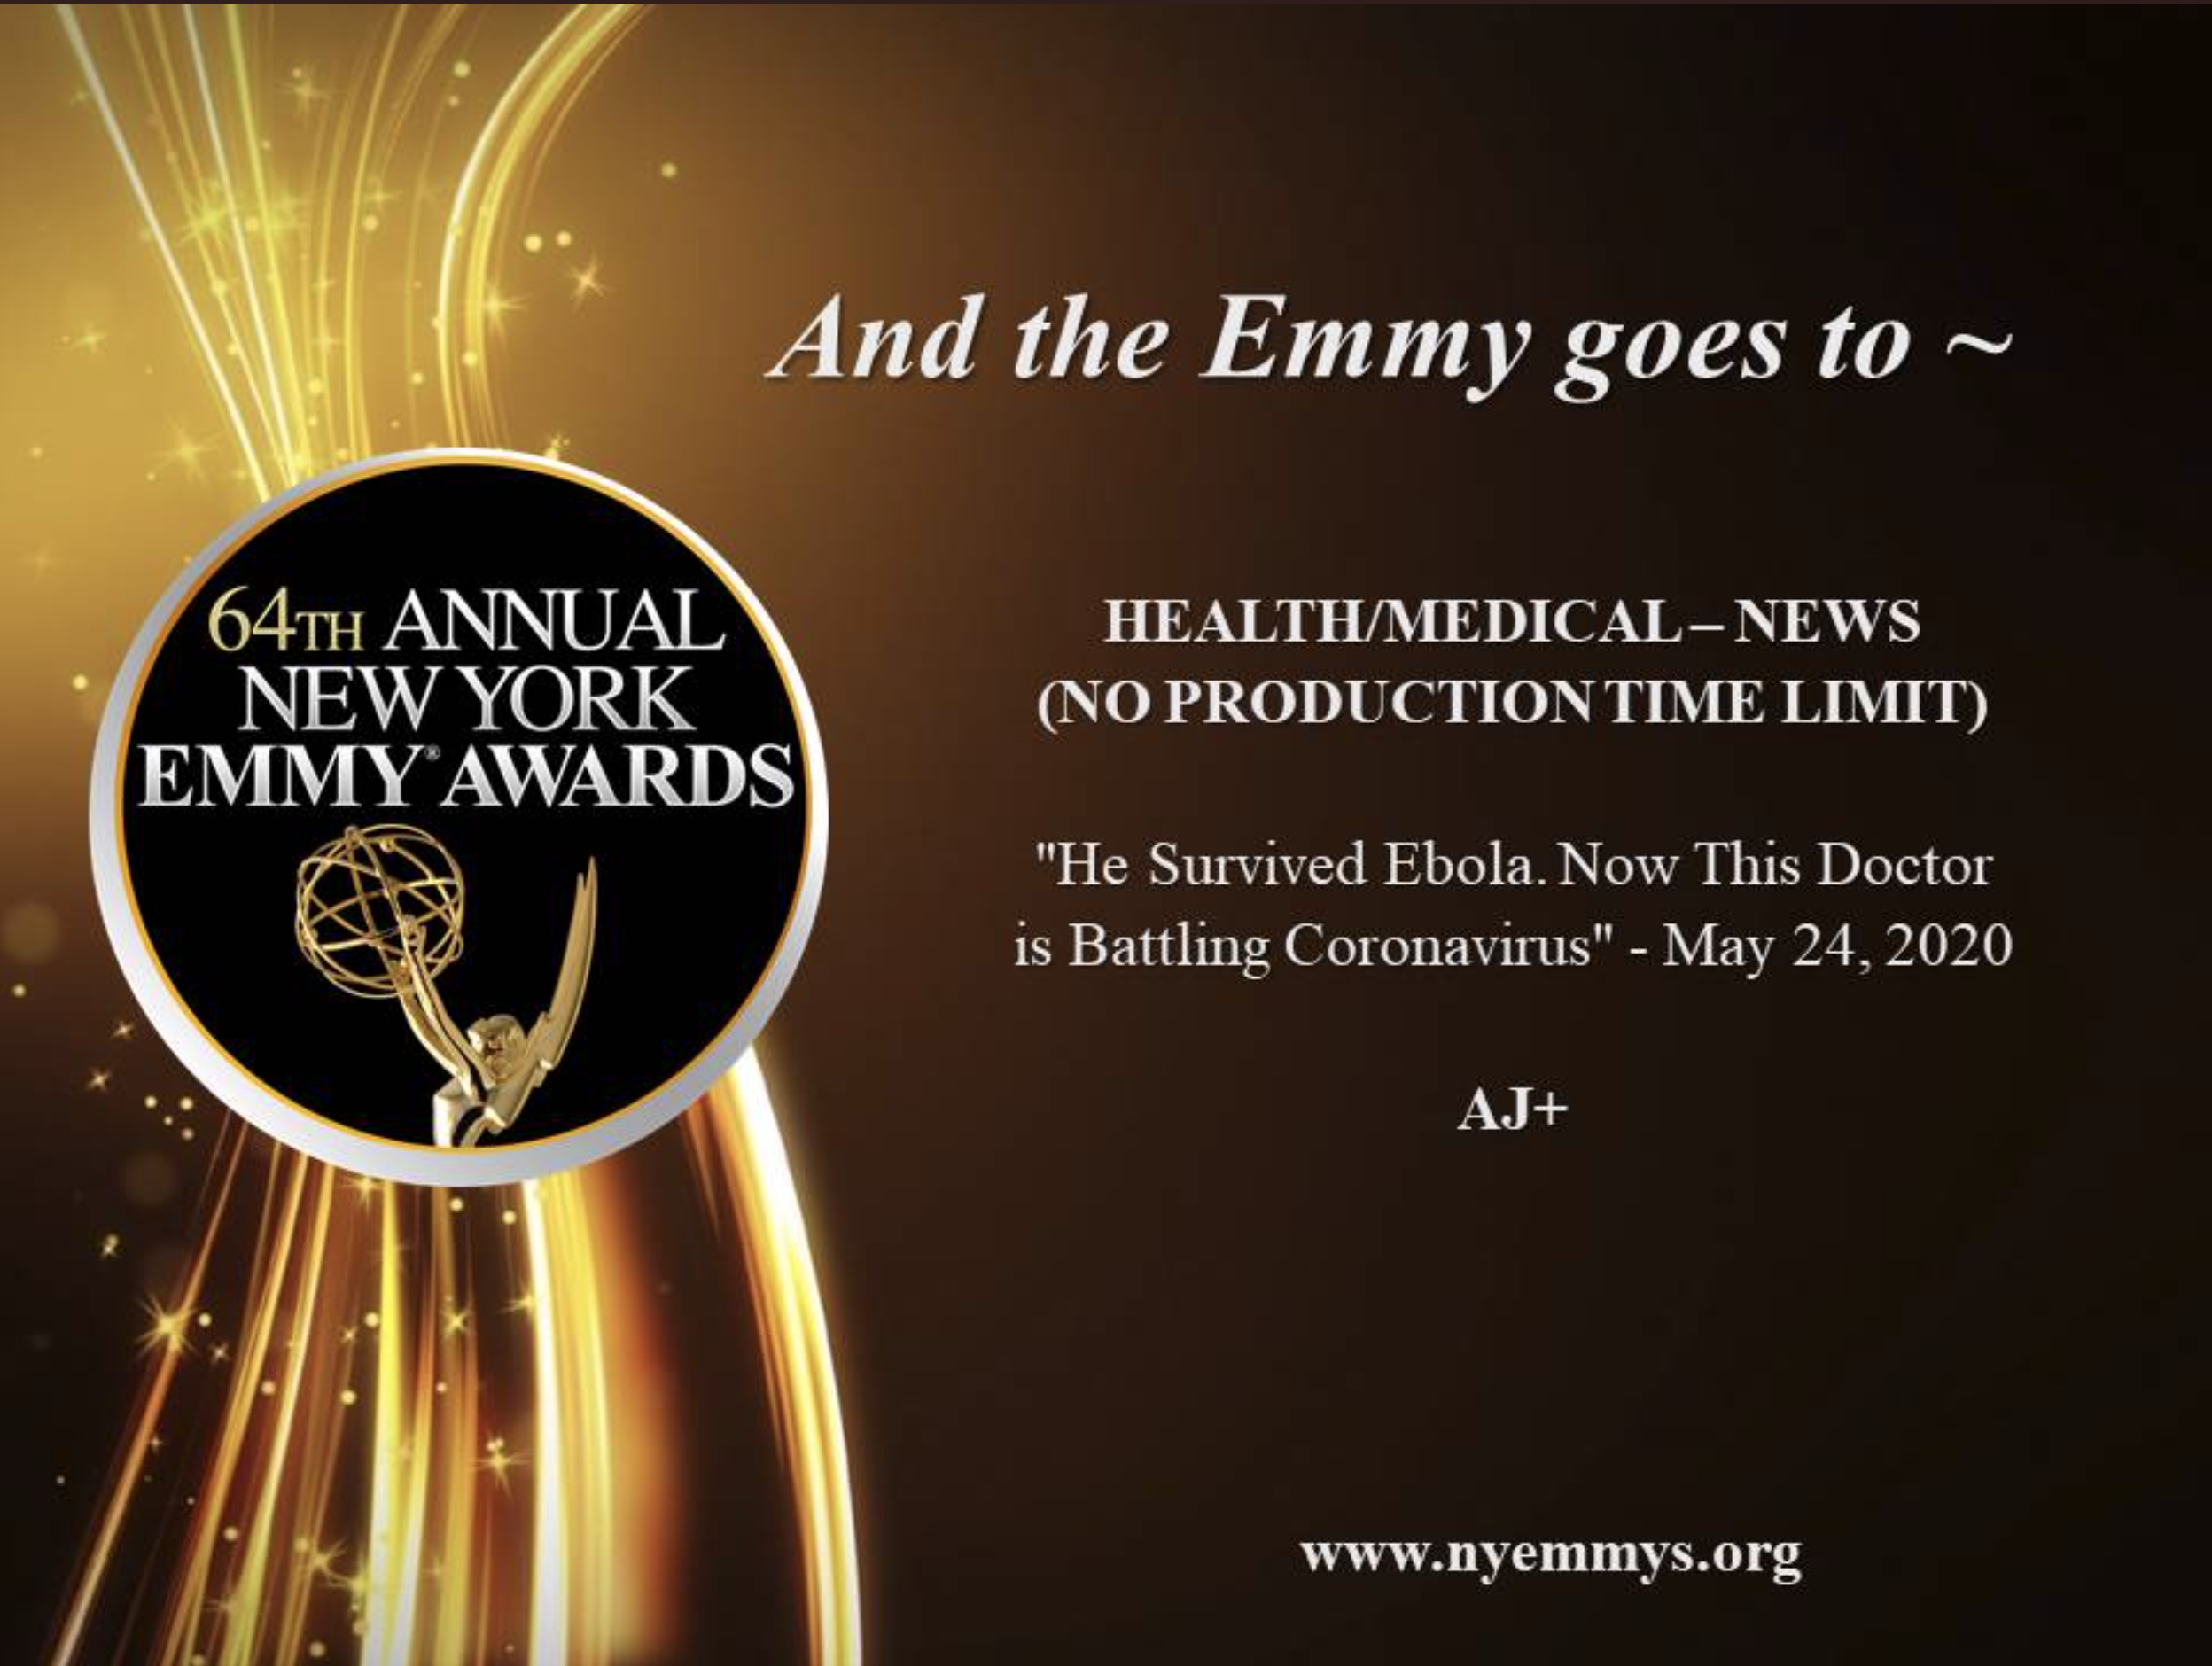 We won a NY Emmy Award for ‘HE SURVIVED EBOLA. NOW THIS DOCTOR IS BATTLING CORONAVIRUS’